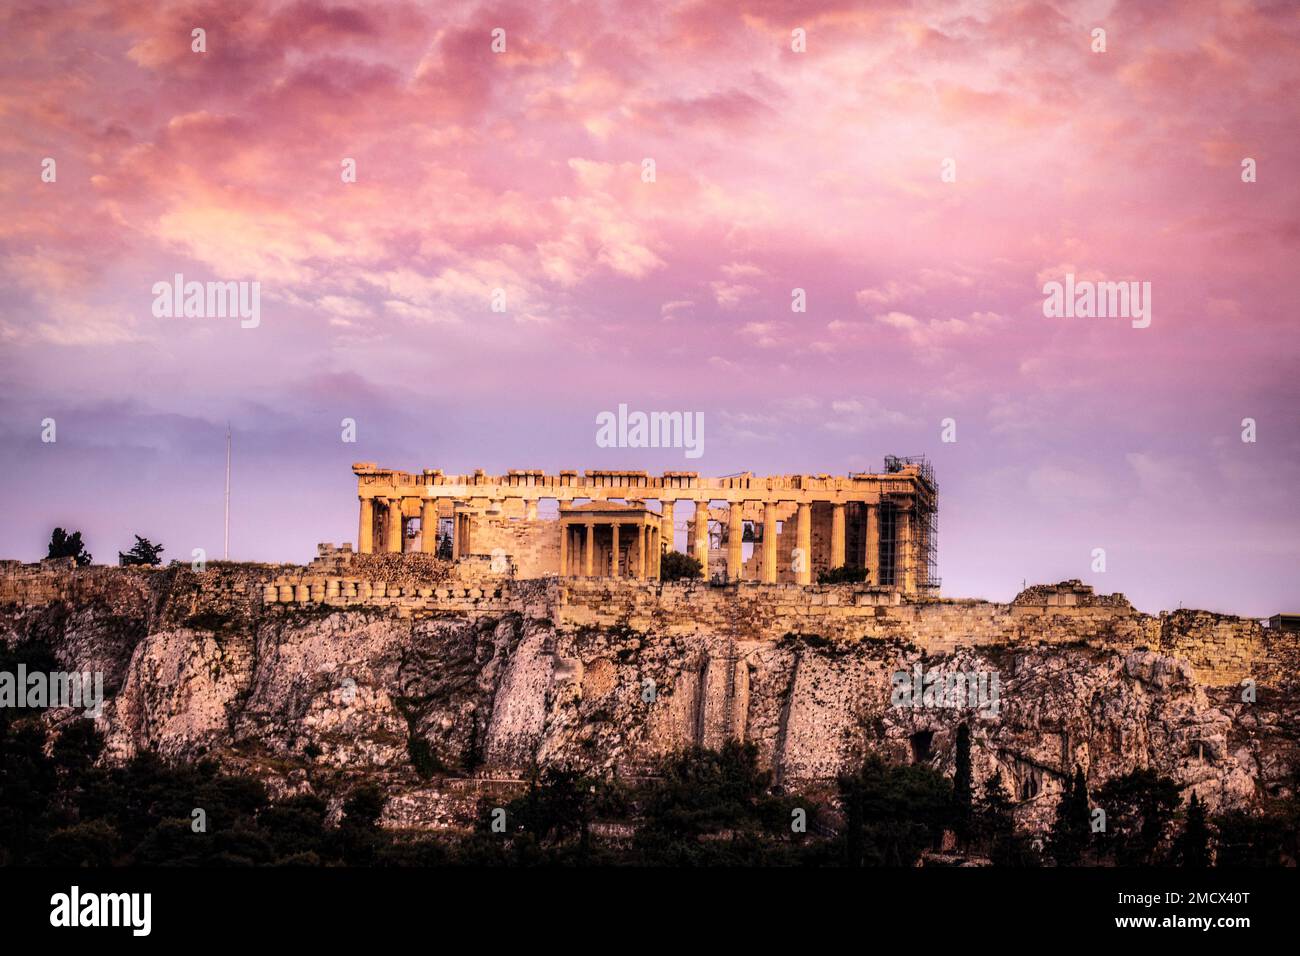 The Acropolis rises above Athens, Greece and is surrounded by a sunset glow. Stock Photo